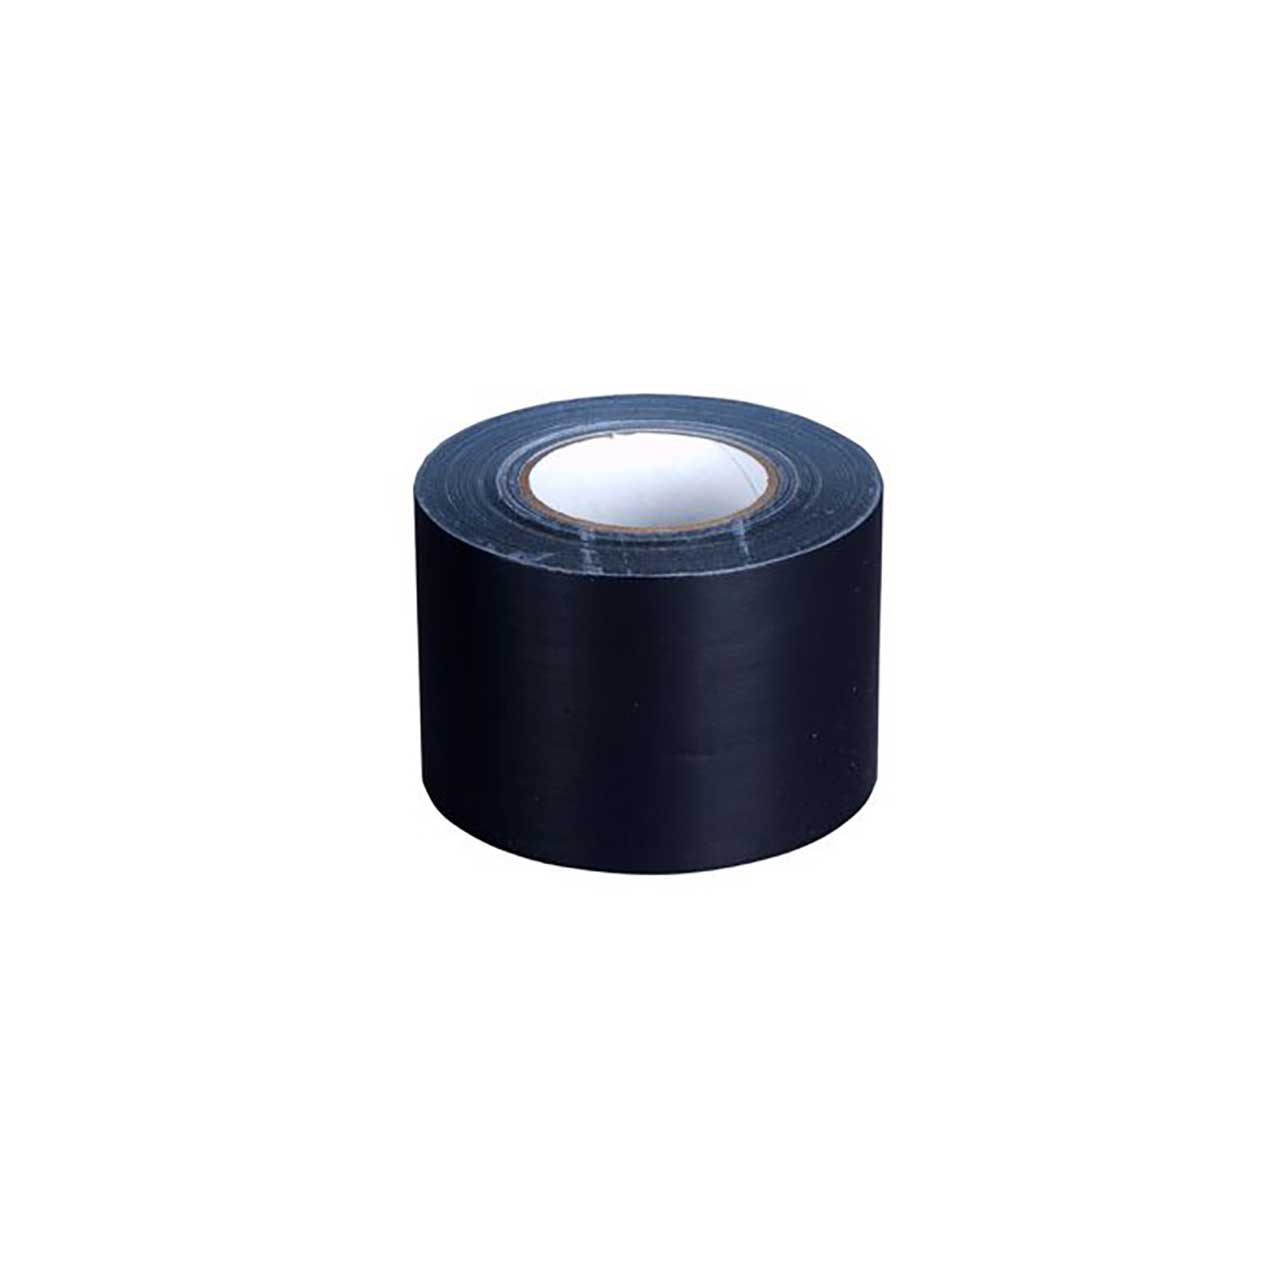 ADJ TAPE/4B Wide Area Tape to Cover Cables & Wires - 4-Inch - Black AMDJ-TAPE-4B